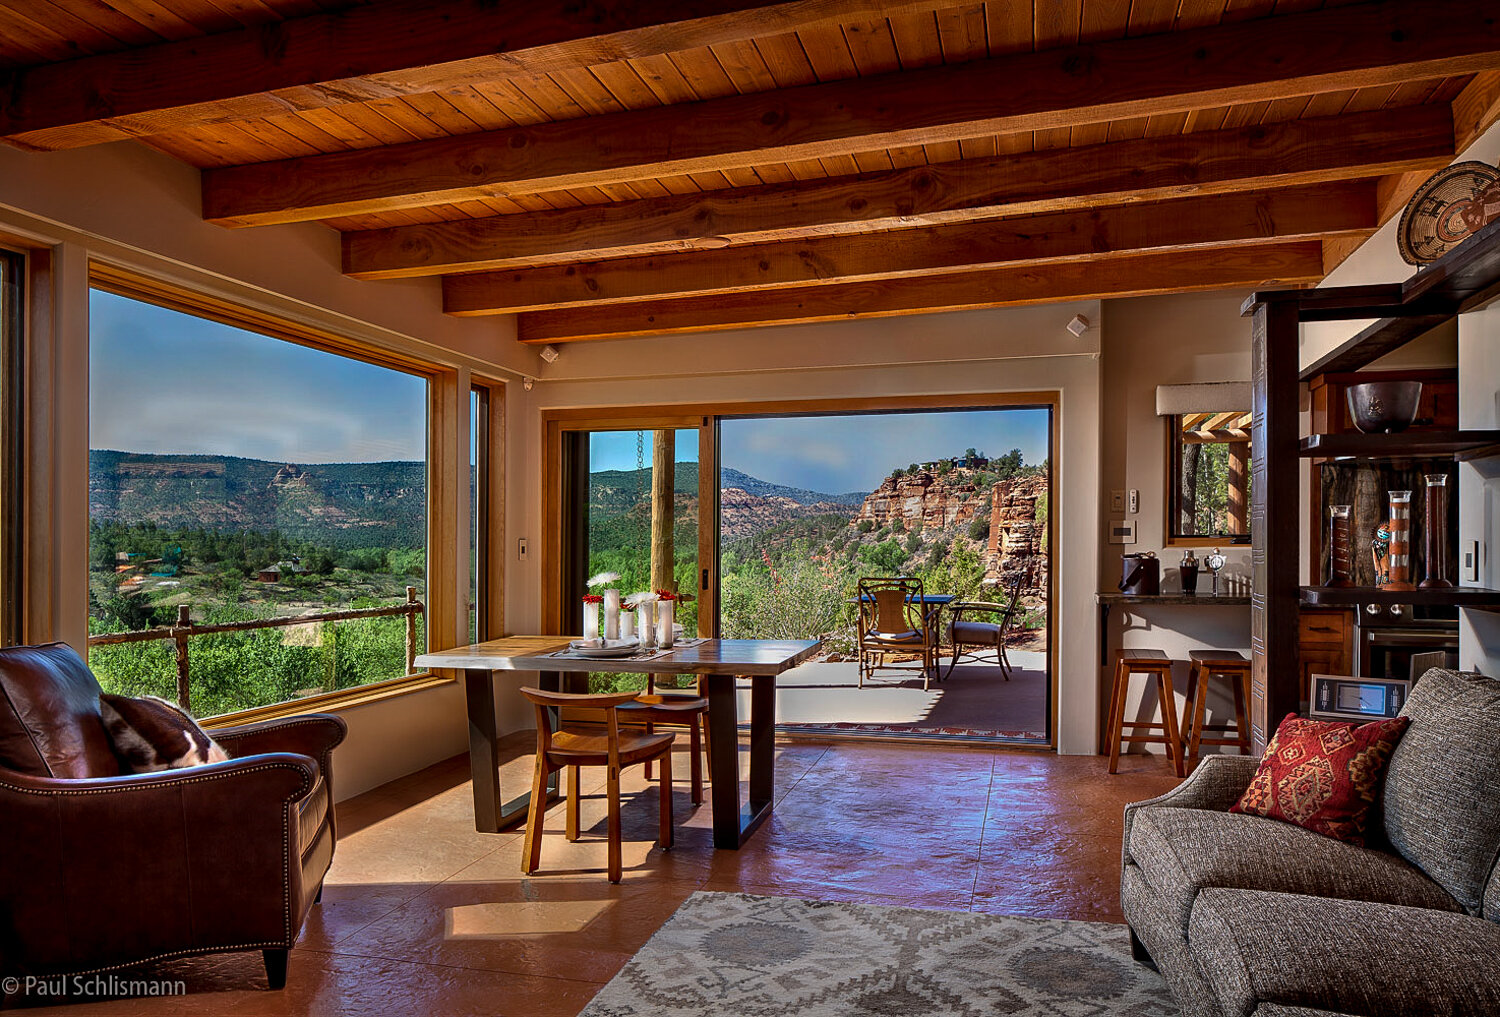 Sedona residential interior with view